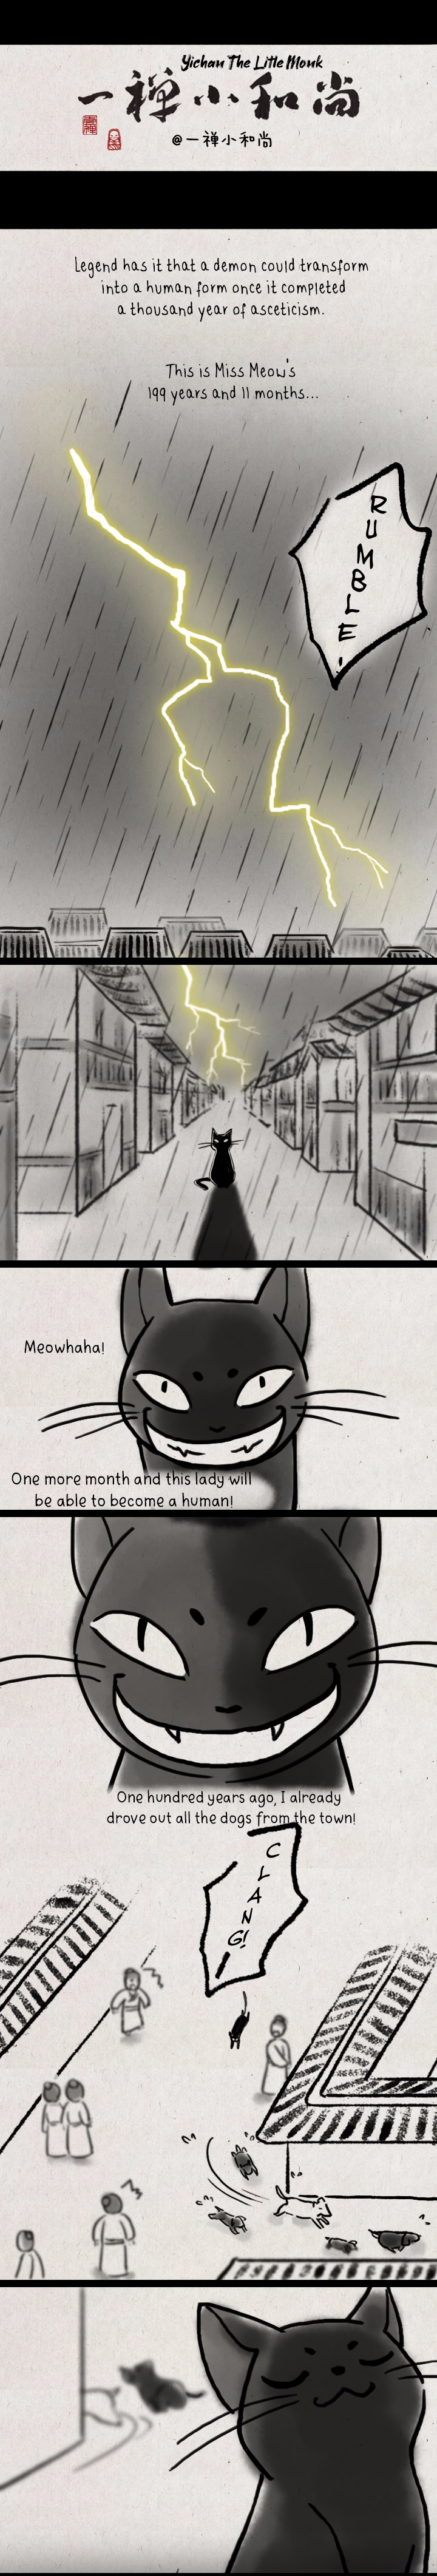 Yichan: The Little Monk - Page 1